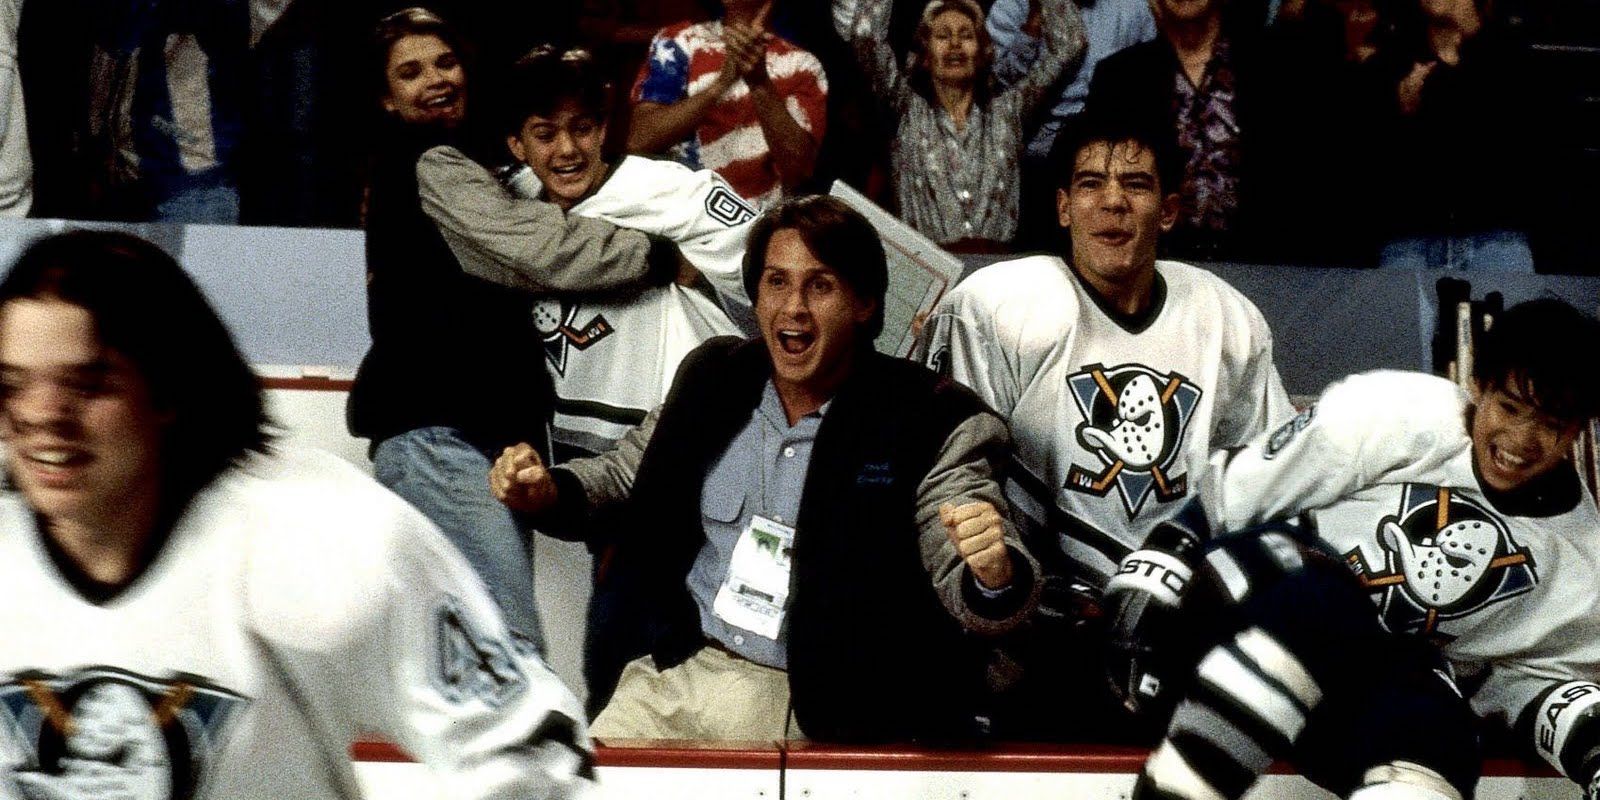 Coach Bombay celebrating in The Mighty Ducks